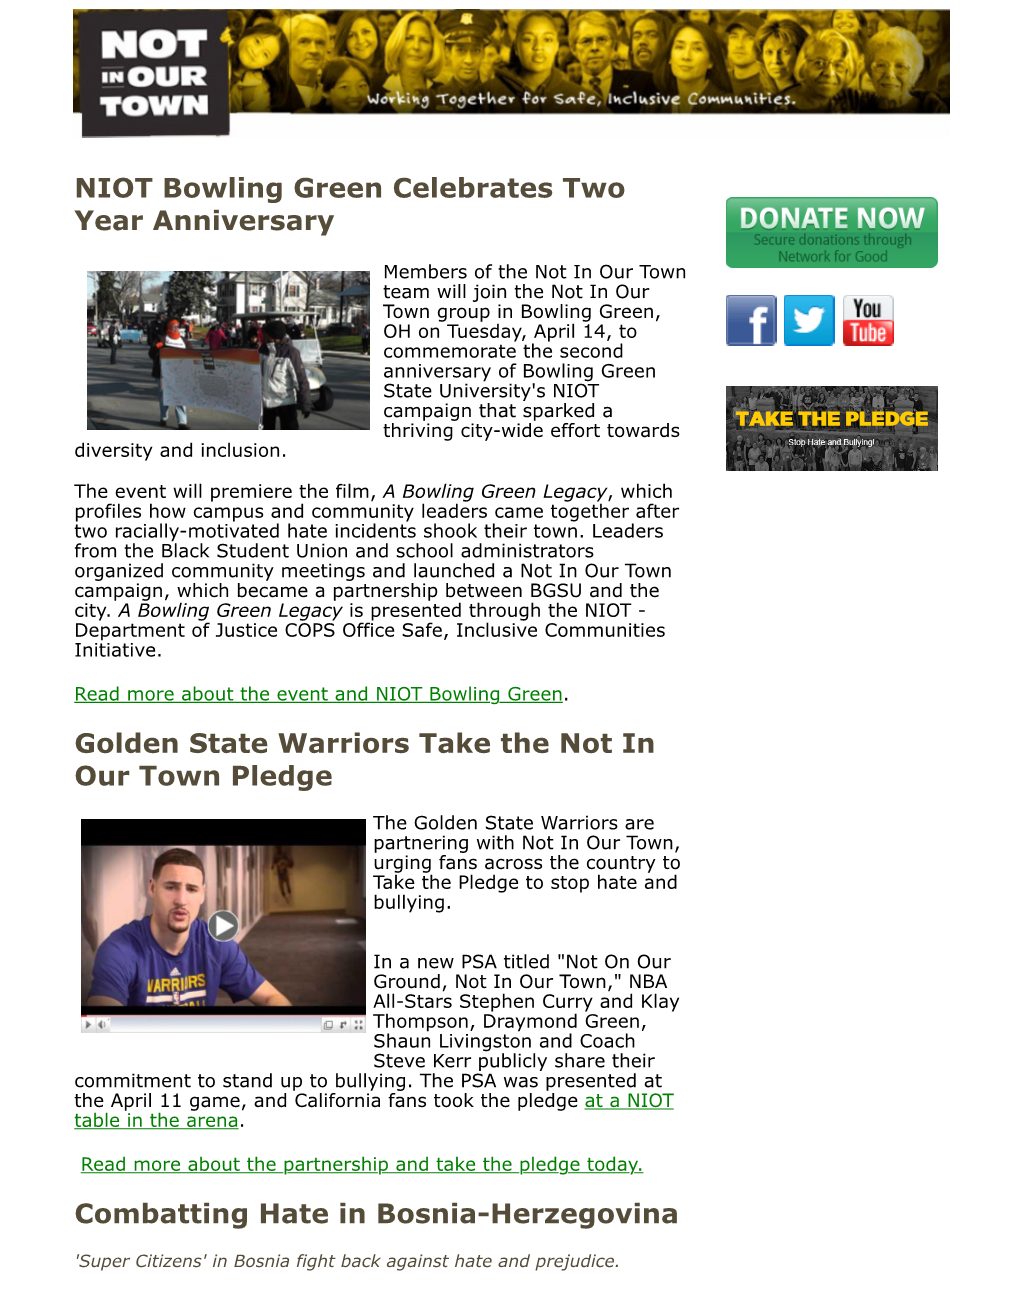 NIOT Bowling Green Celebrates Two Year Anniversary Golden State